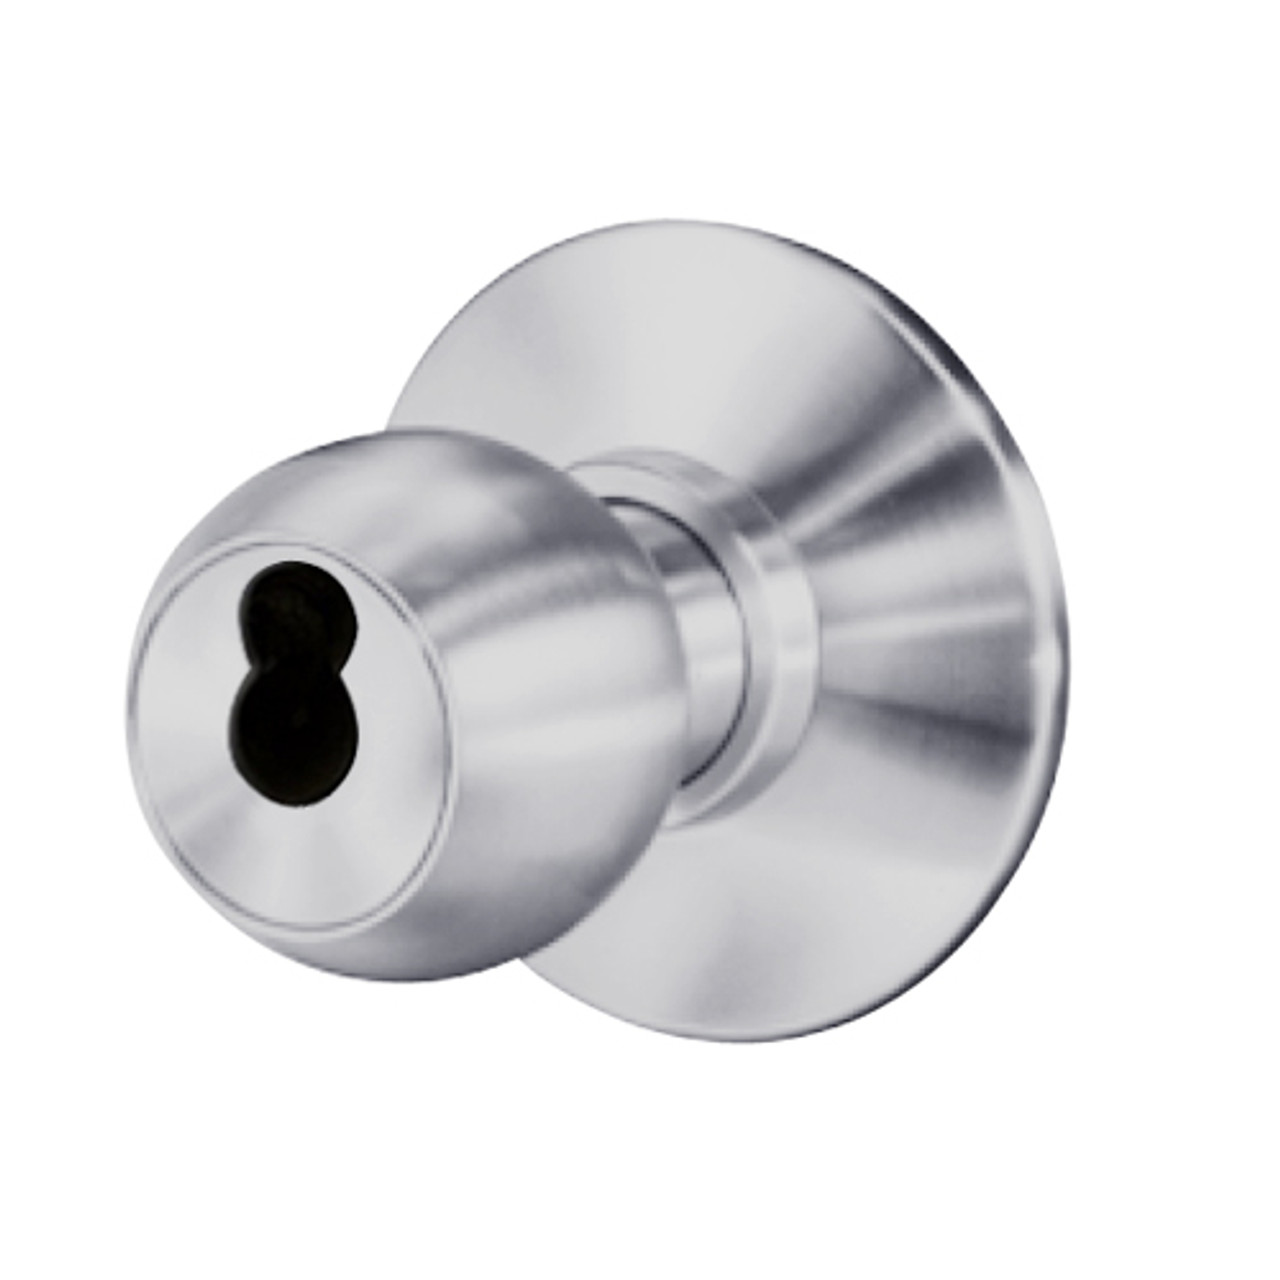 8K37XR4DSTK626 Best 8K Series Special Heavy Duty Cylindrical Knob Locks with Round Style in Satin Chrome